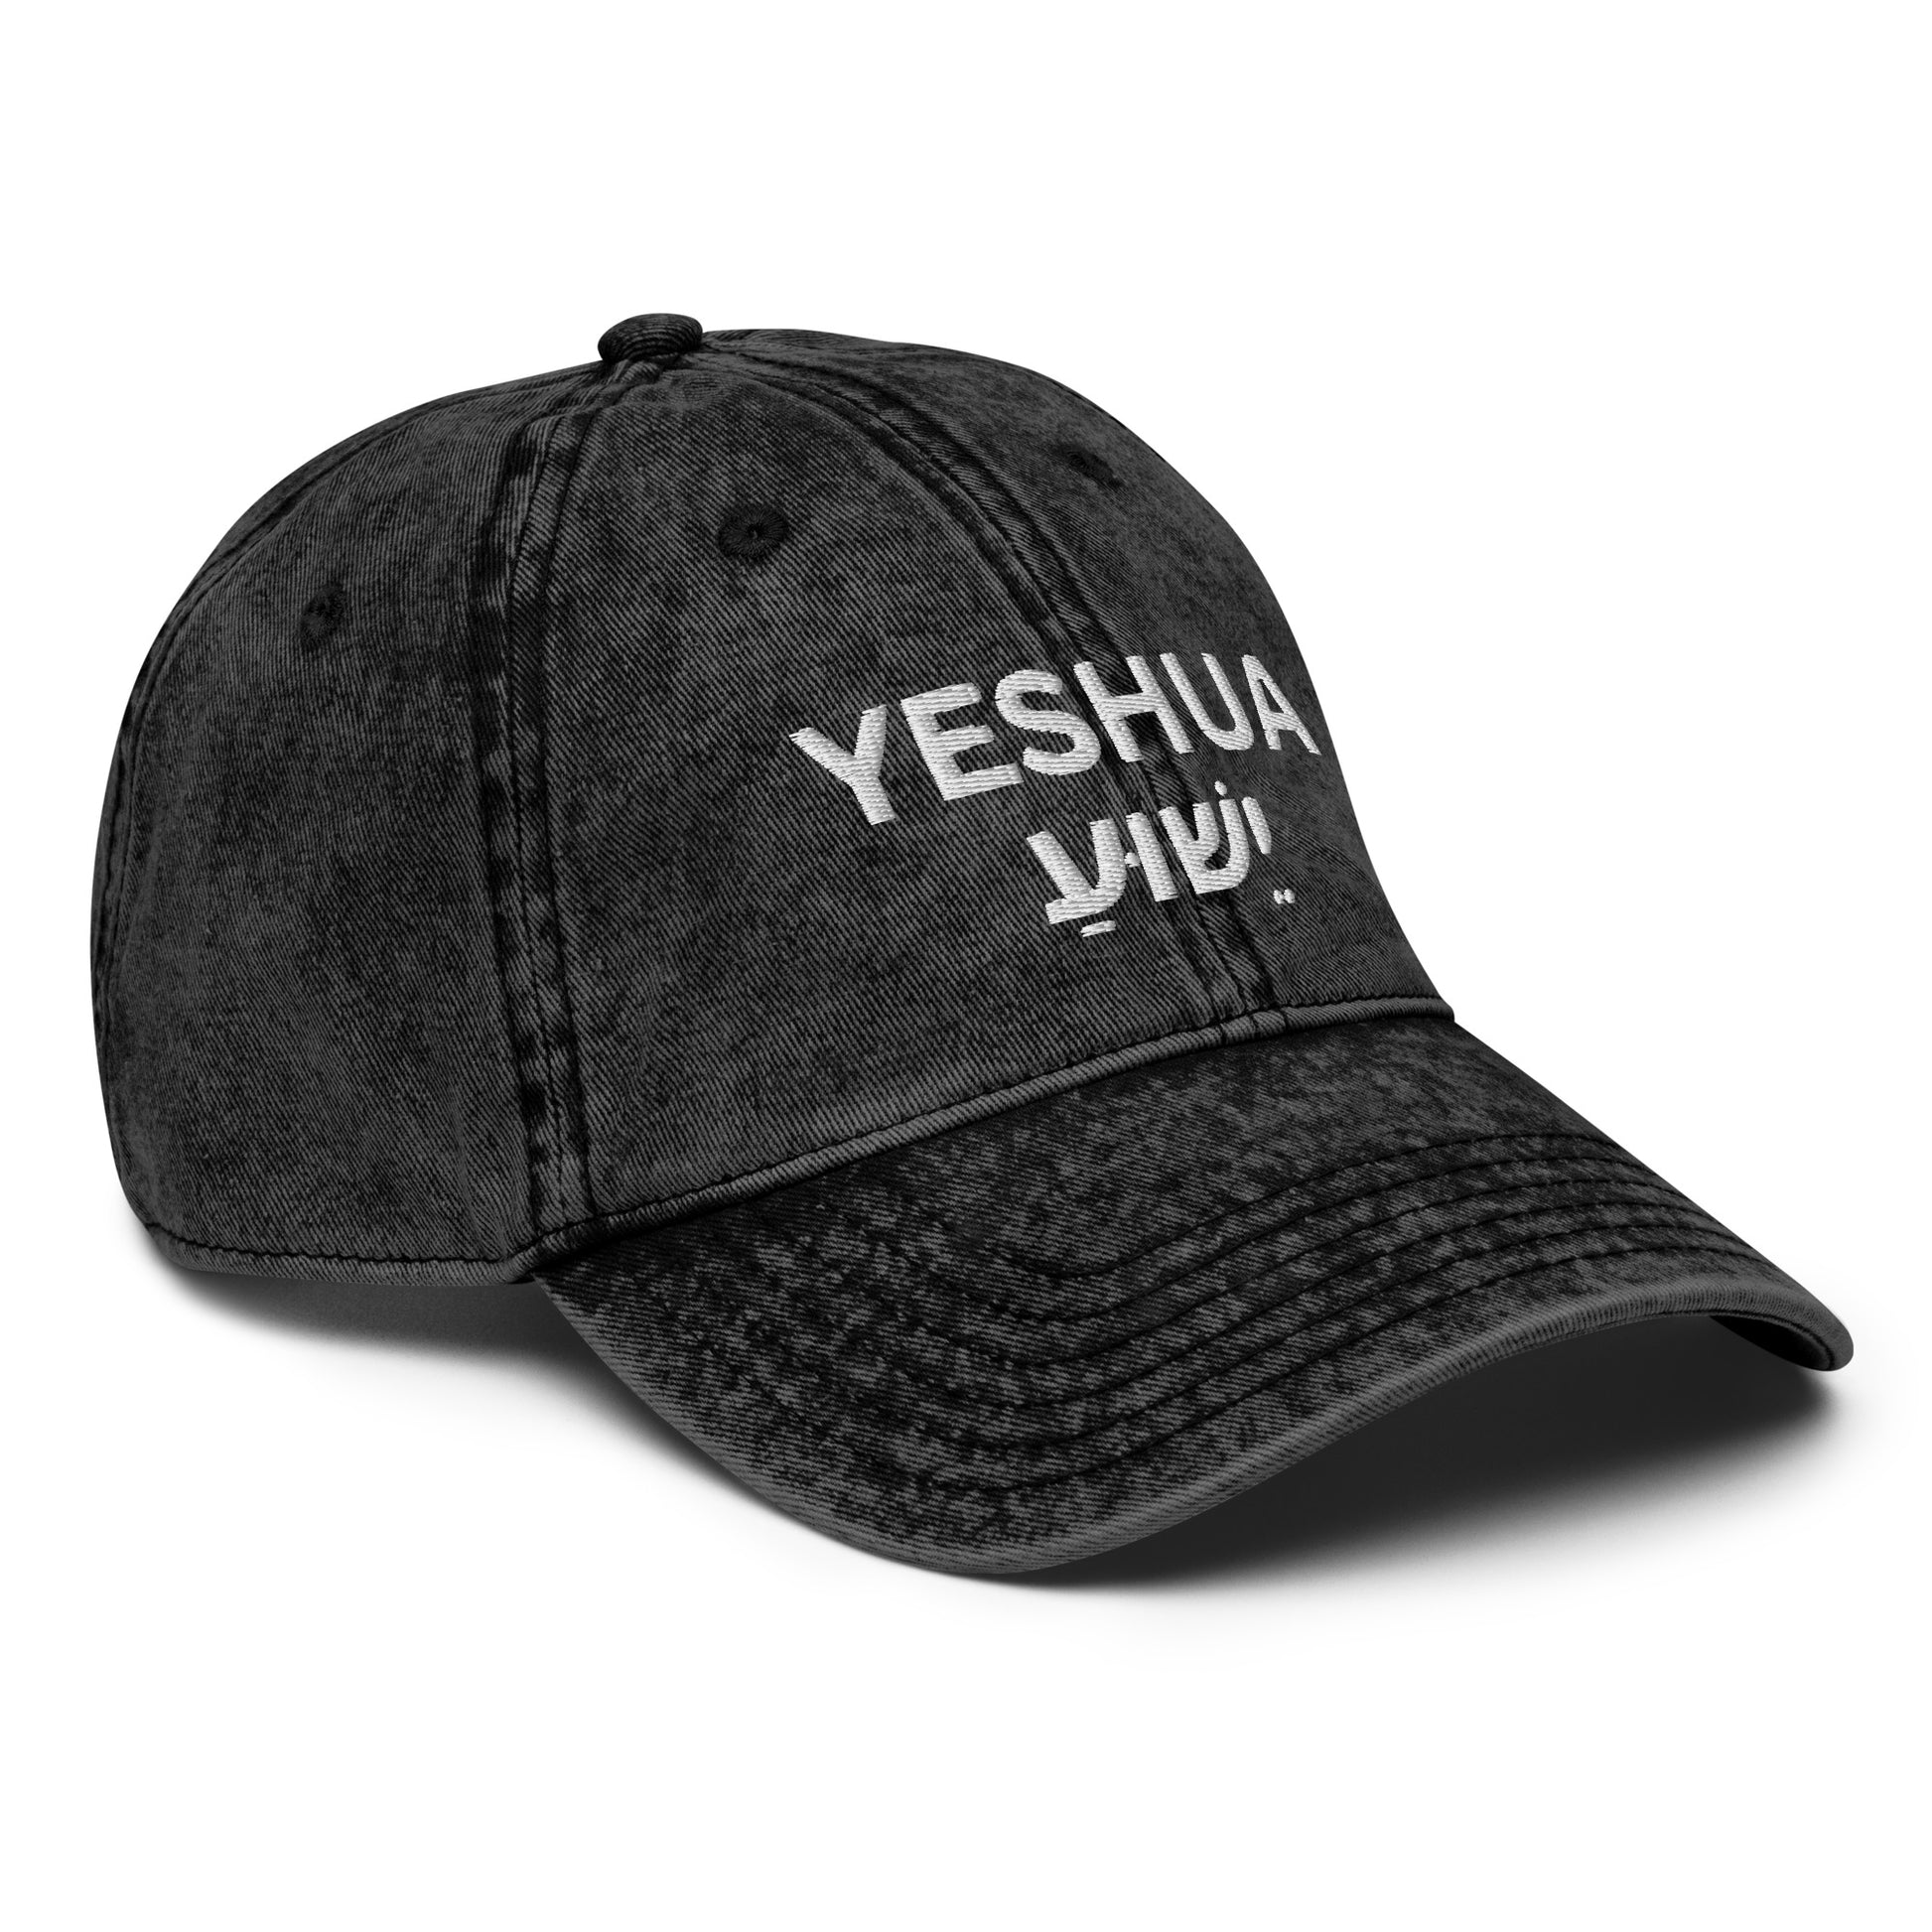 Vintage Cotton Twill "Yeshua" Embroidered Cap - Humble & Faithful Co.